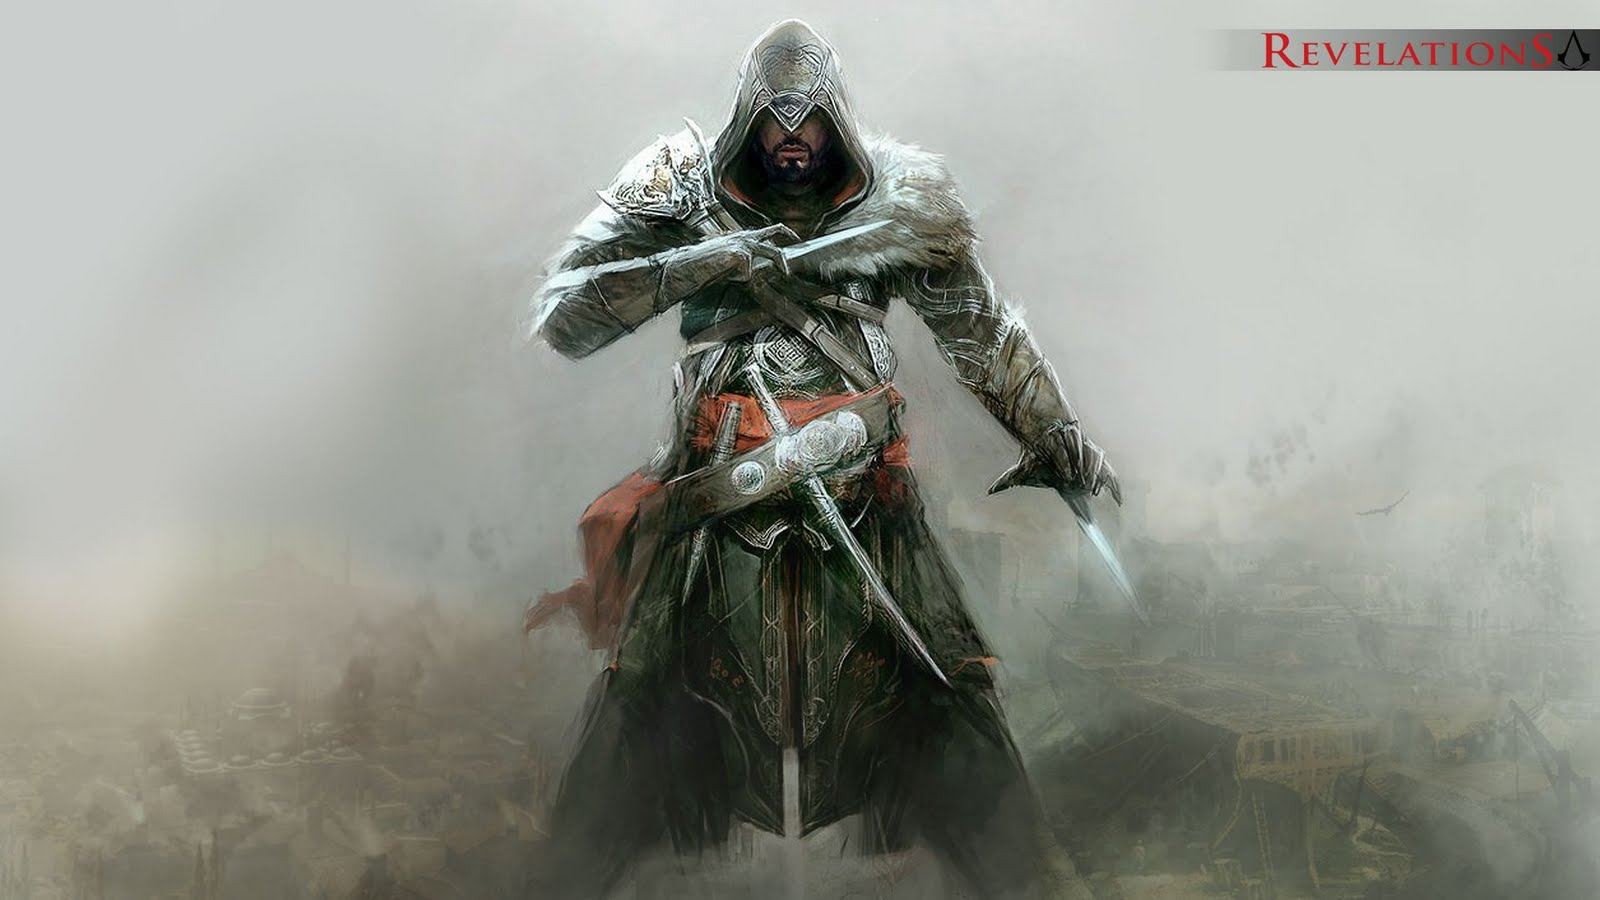 assassin's creed revelations wallpaper,armour,games,pc game,warlord,cg artwork